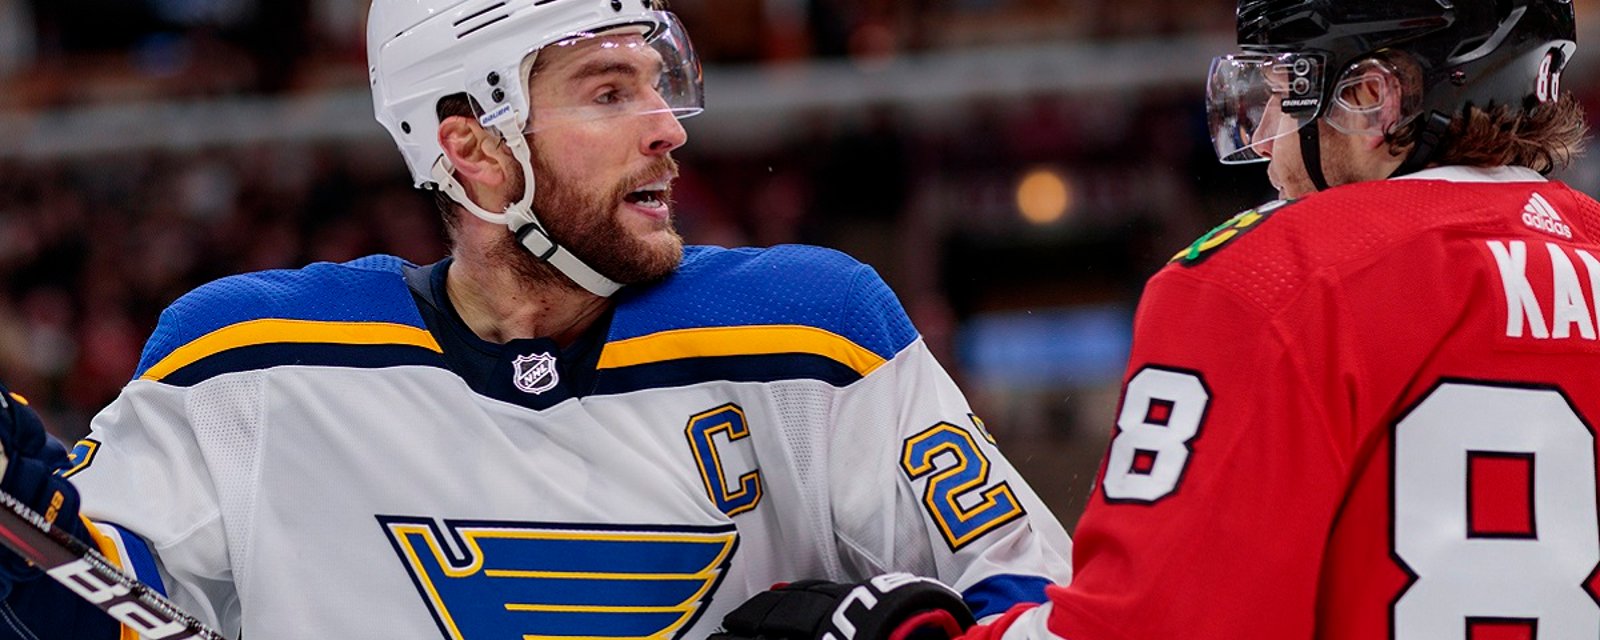 Rumor: Leafs have put multiple pieces in play in a bid to get Alex Pietrangelo.